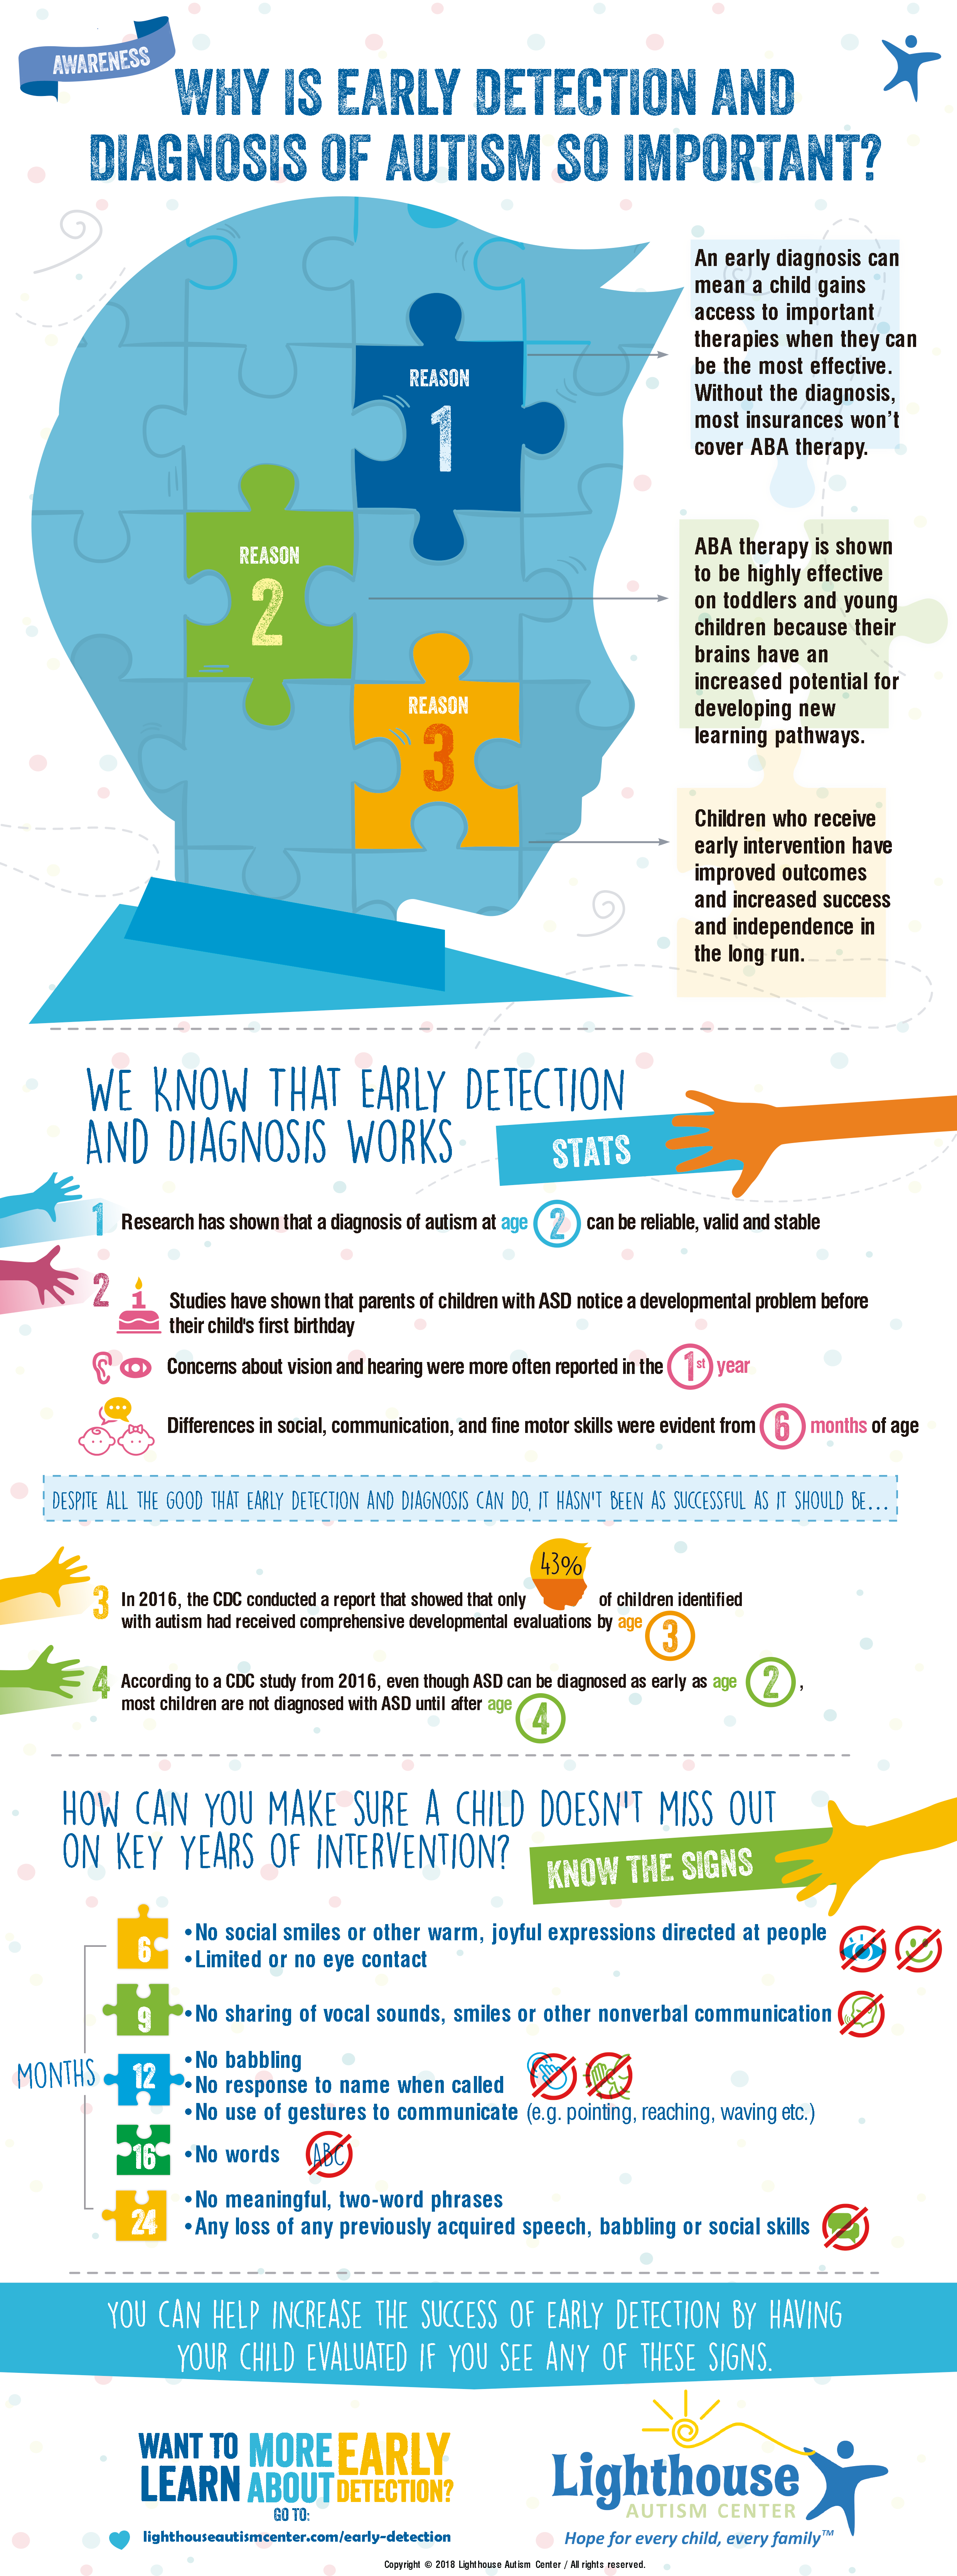 infographic - early detection and diagnosis of autism